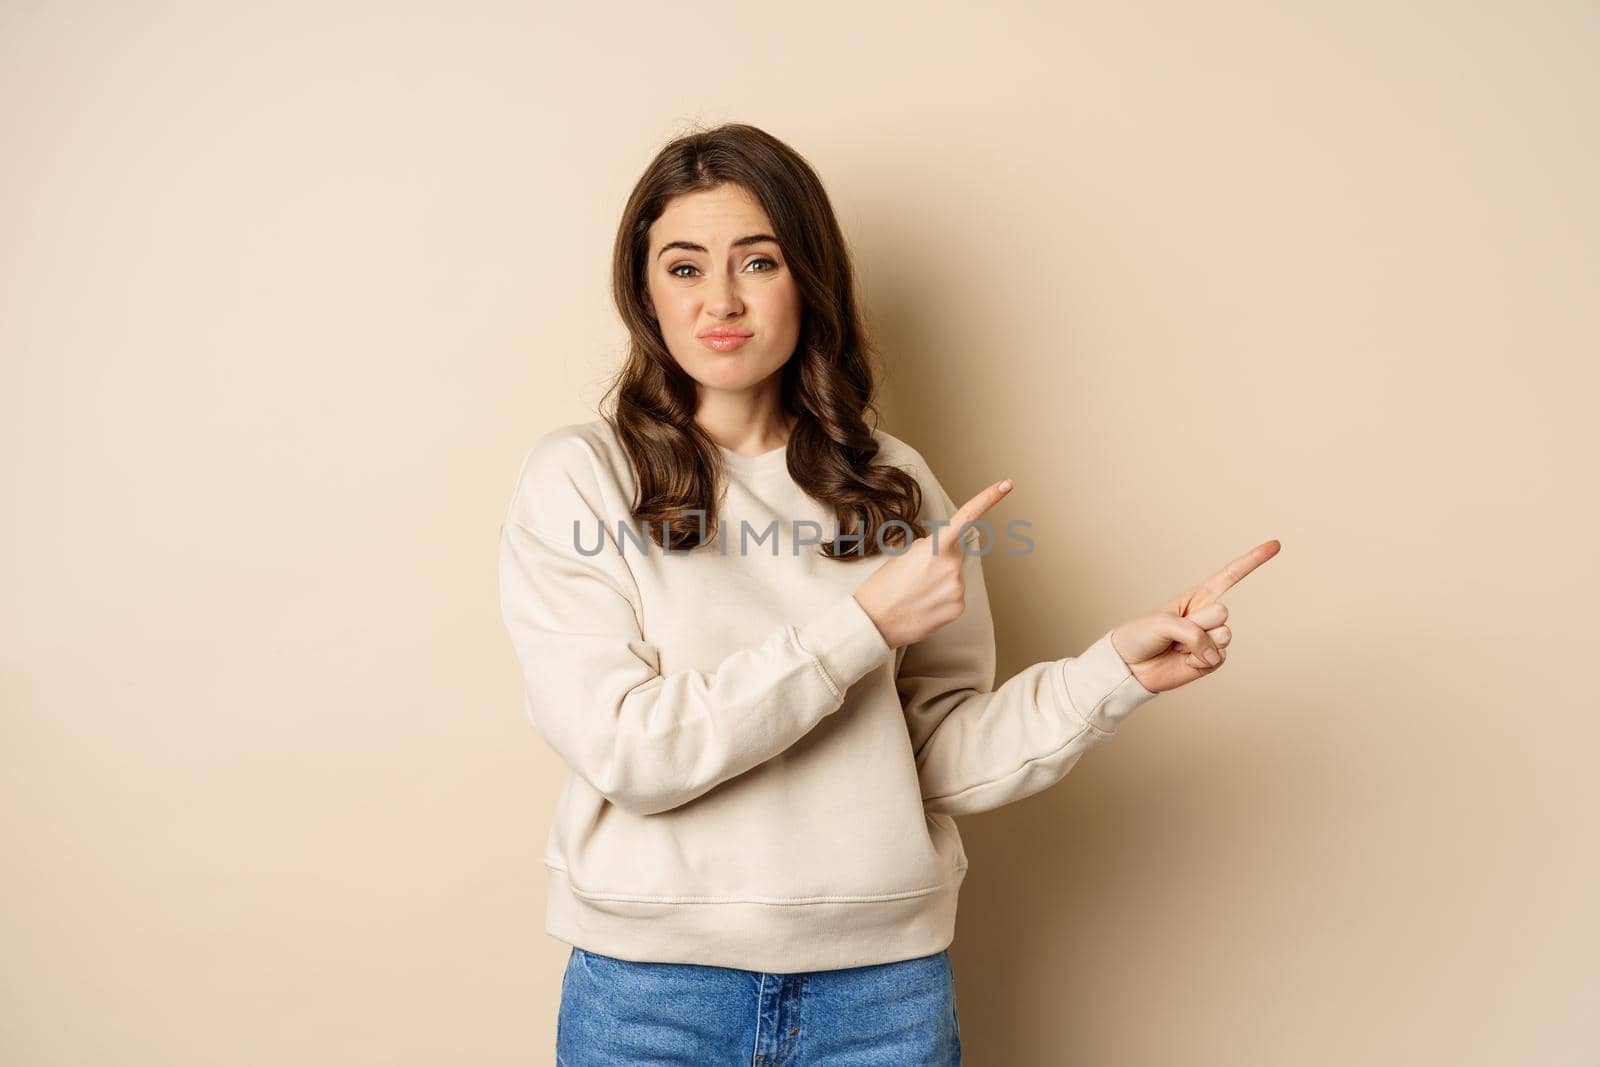 Skeptical girl looking hesitant, pointing fingers right at logo, promo text, standing over beige background.